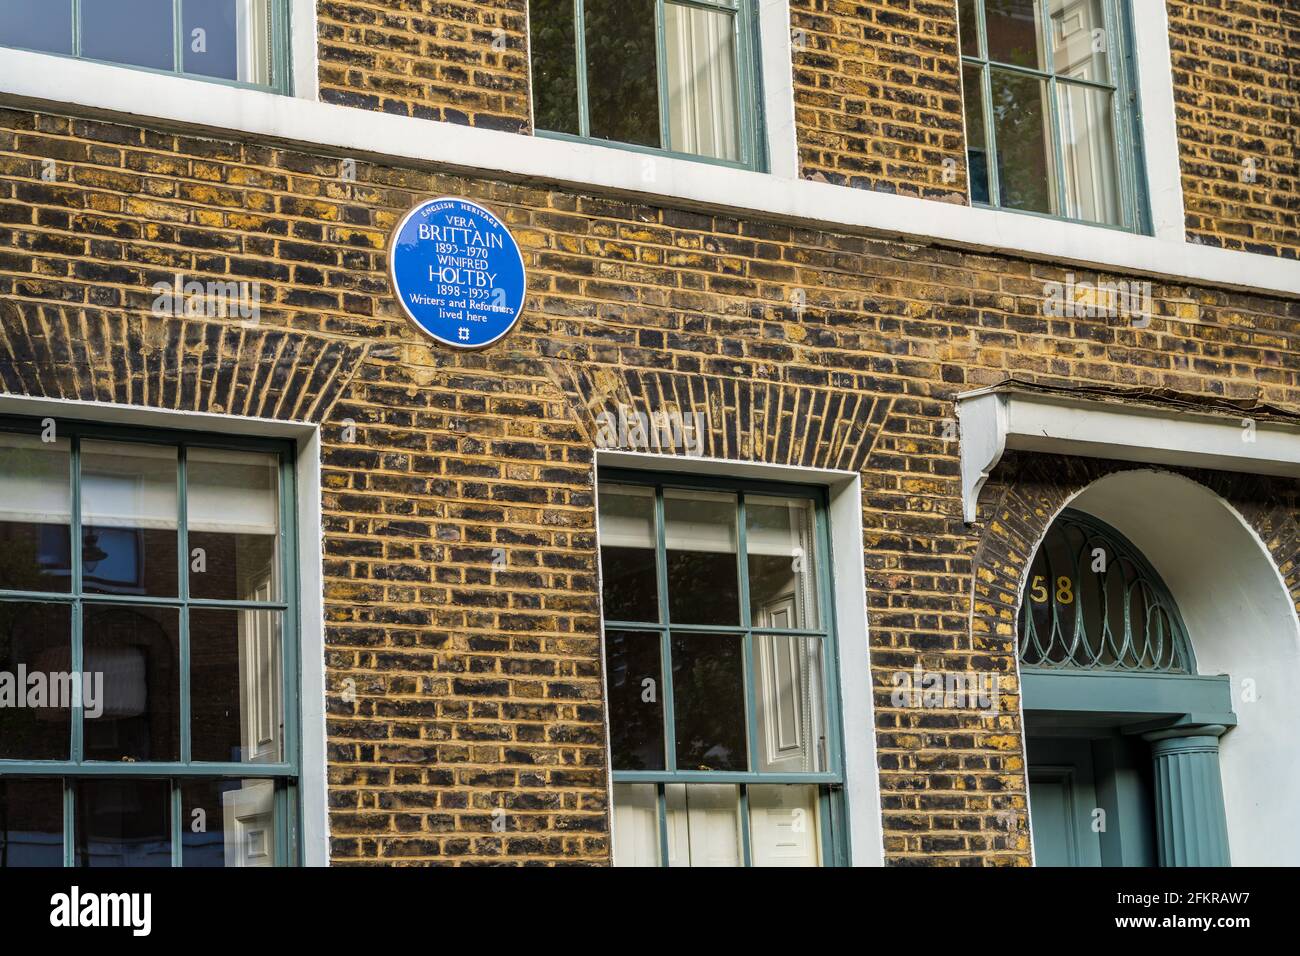 Vera Brittain & Winifred Holtby Blue Plaque at 58 Doughty St, Bloomsbury Central London. English Heritage Blue Plaques Bloomsbury London. Stock Photo